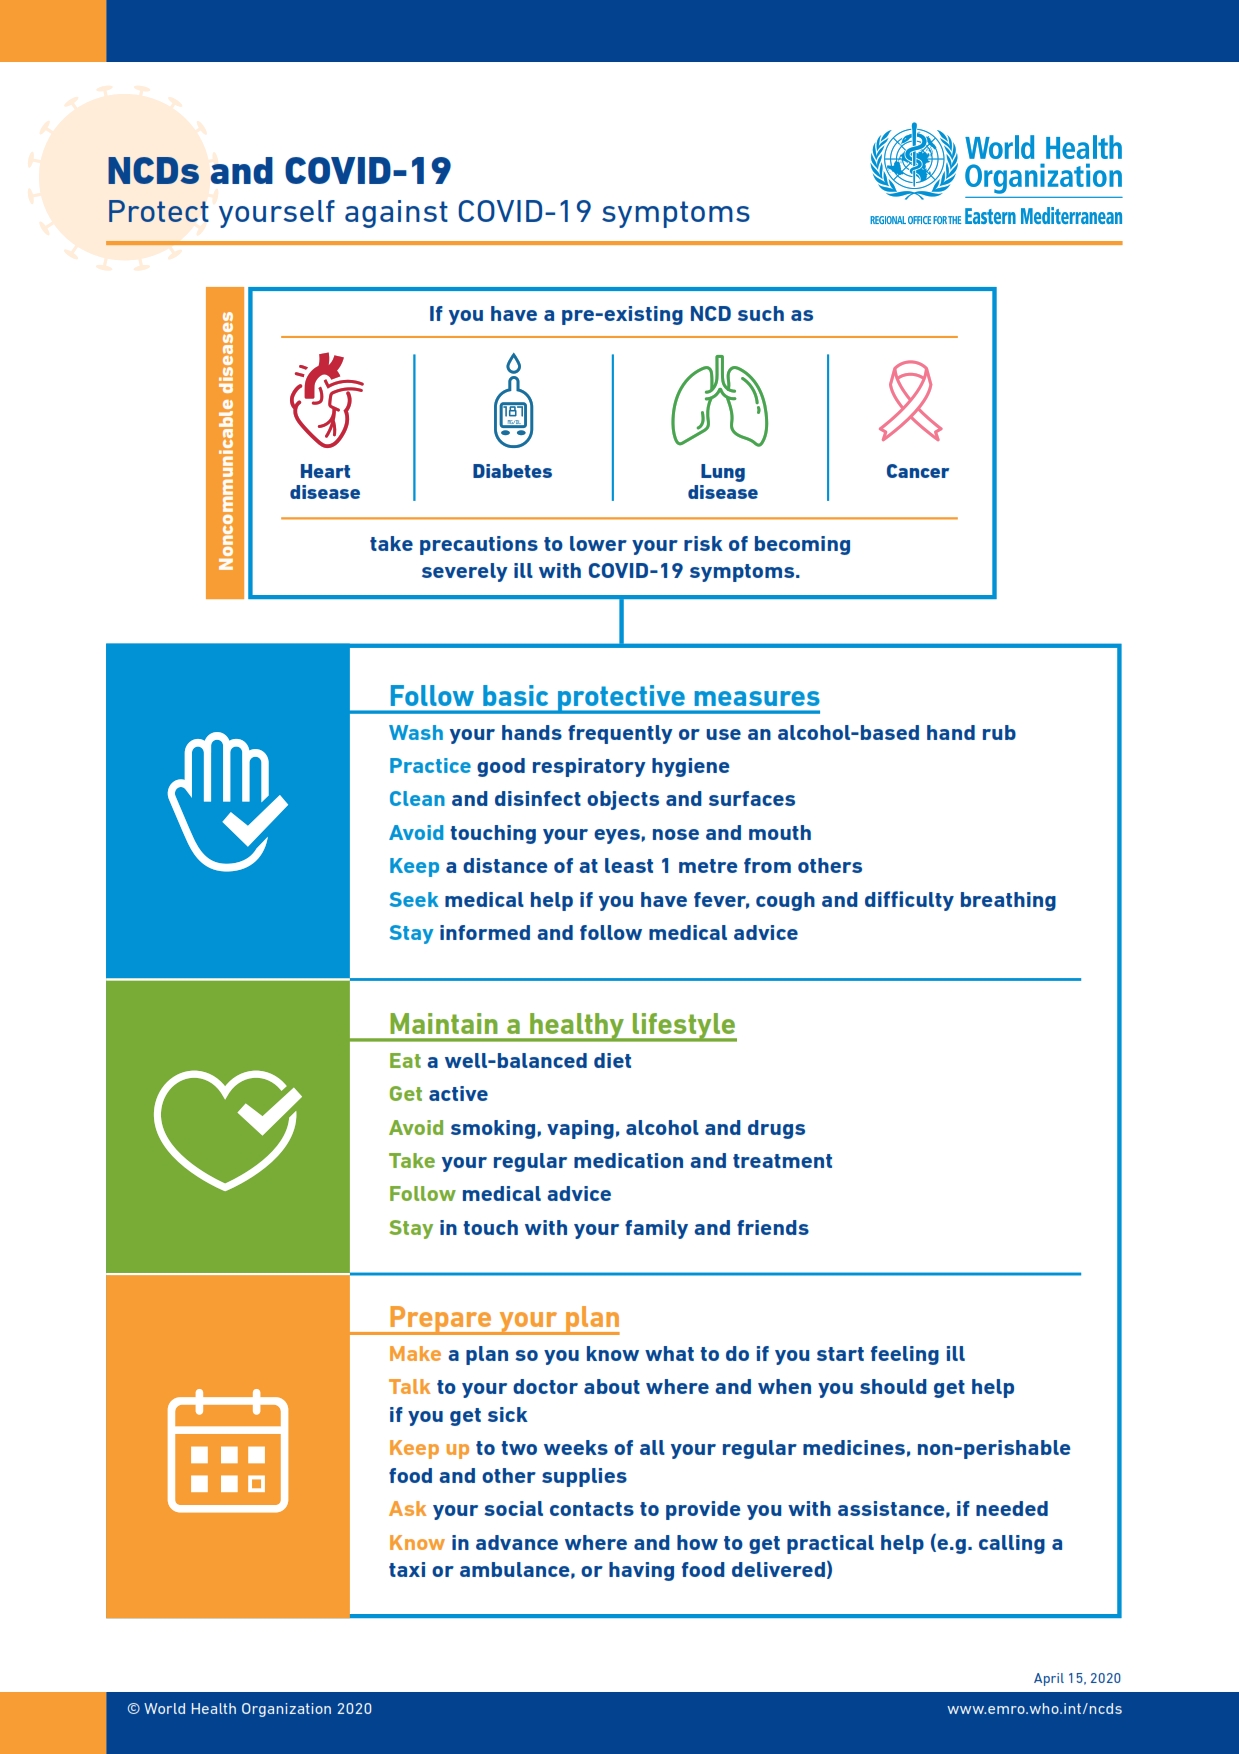 infographic_ncds_protect_yourself_against_covid_apr_2020_001